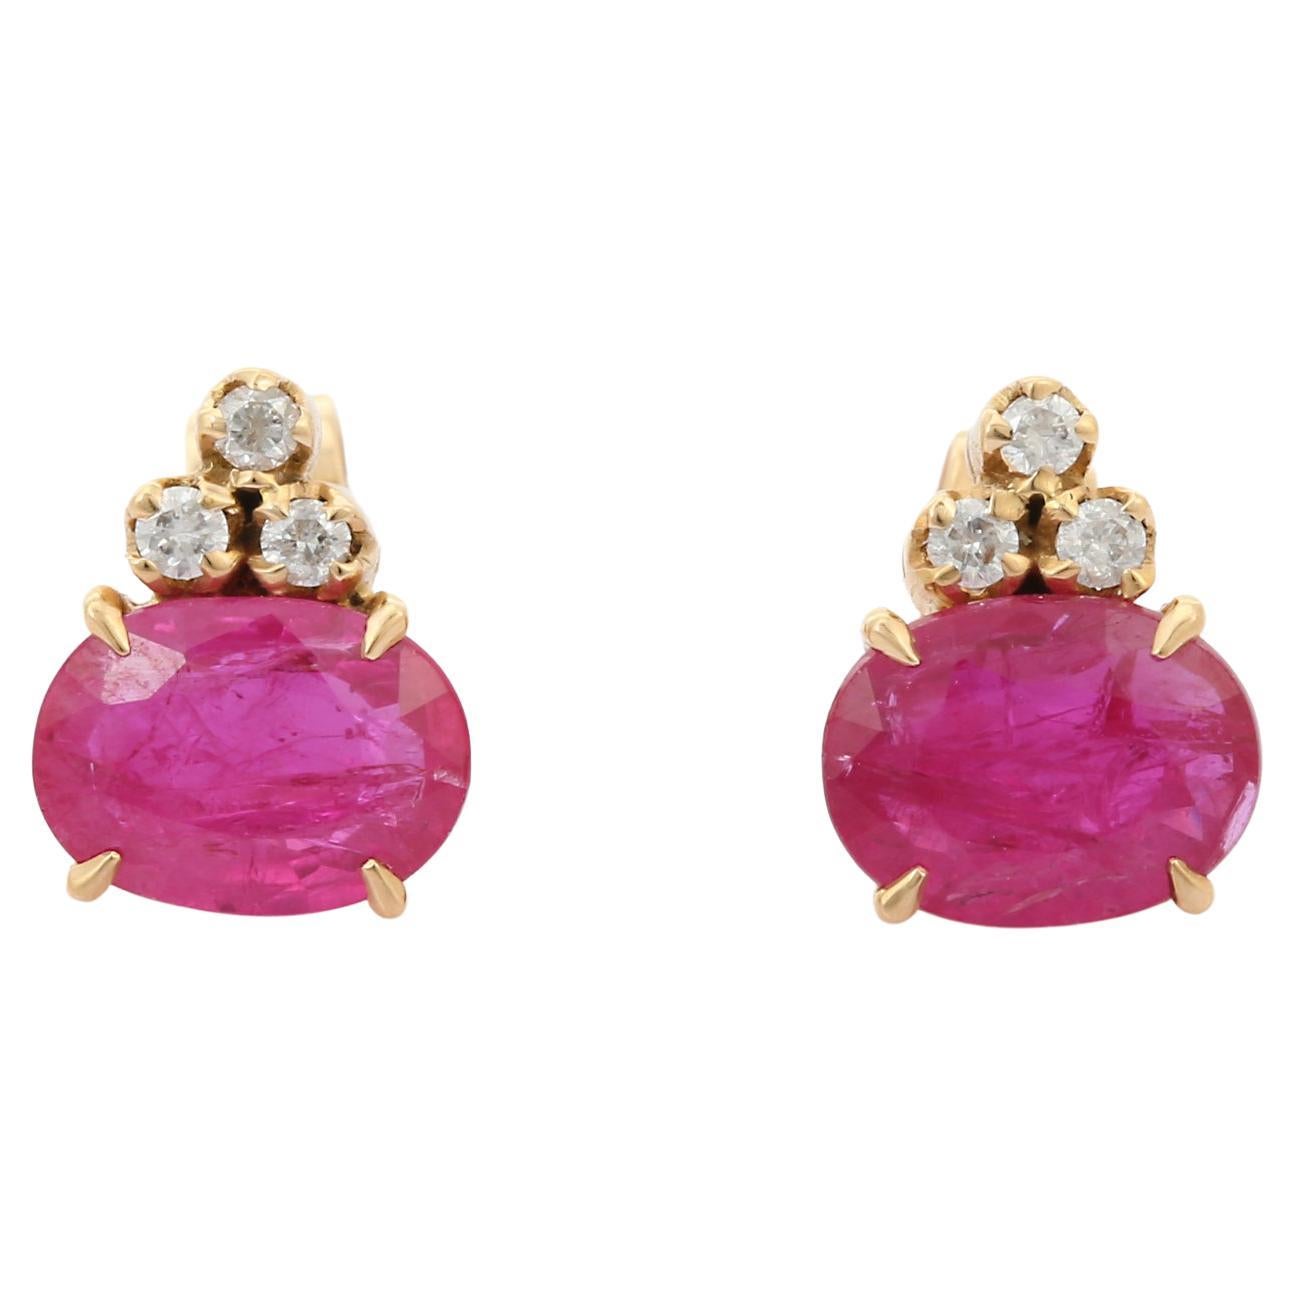 1.7 Ct Oval Cut Ruby Stud Earrings with Diamonds Studded in 18K Yellow Gold